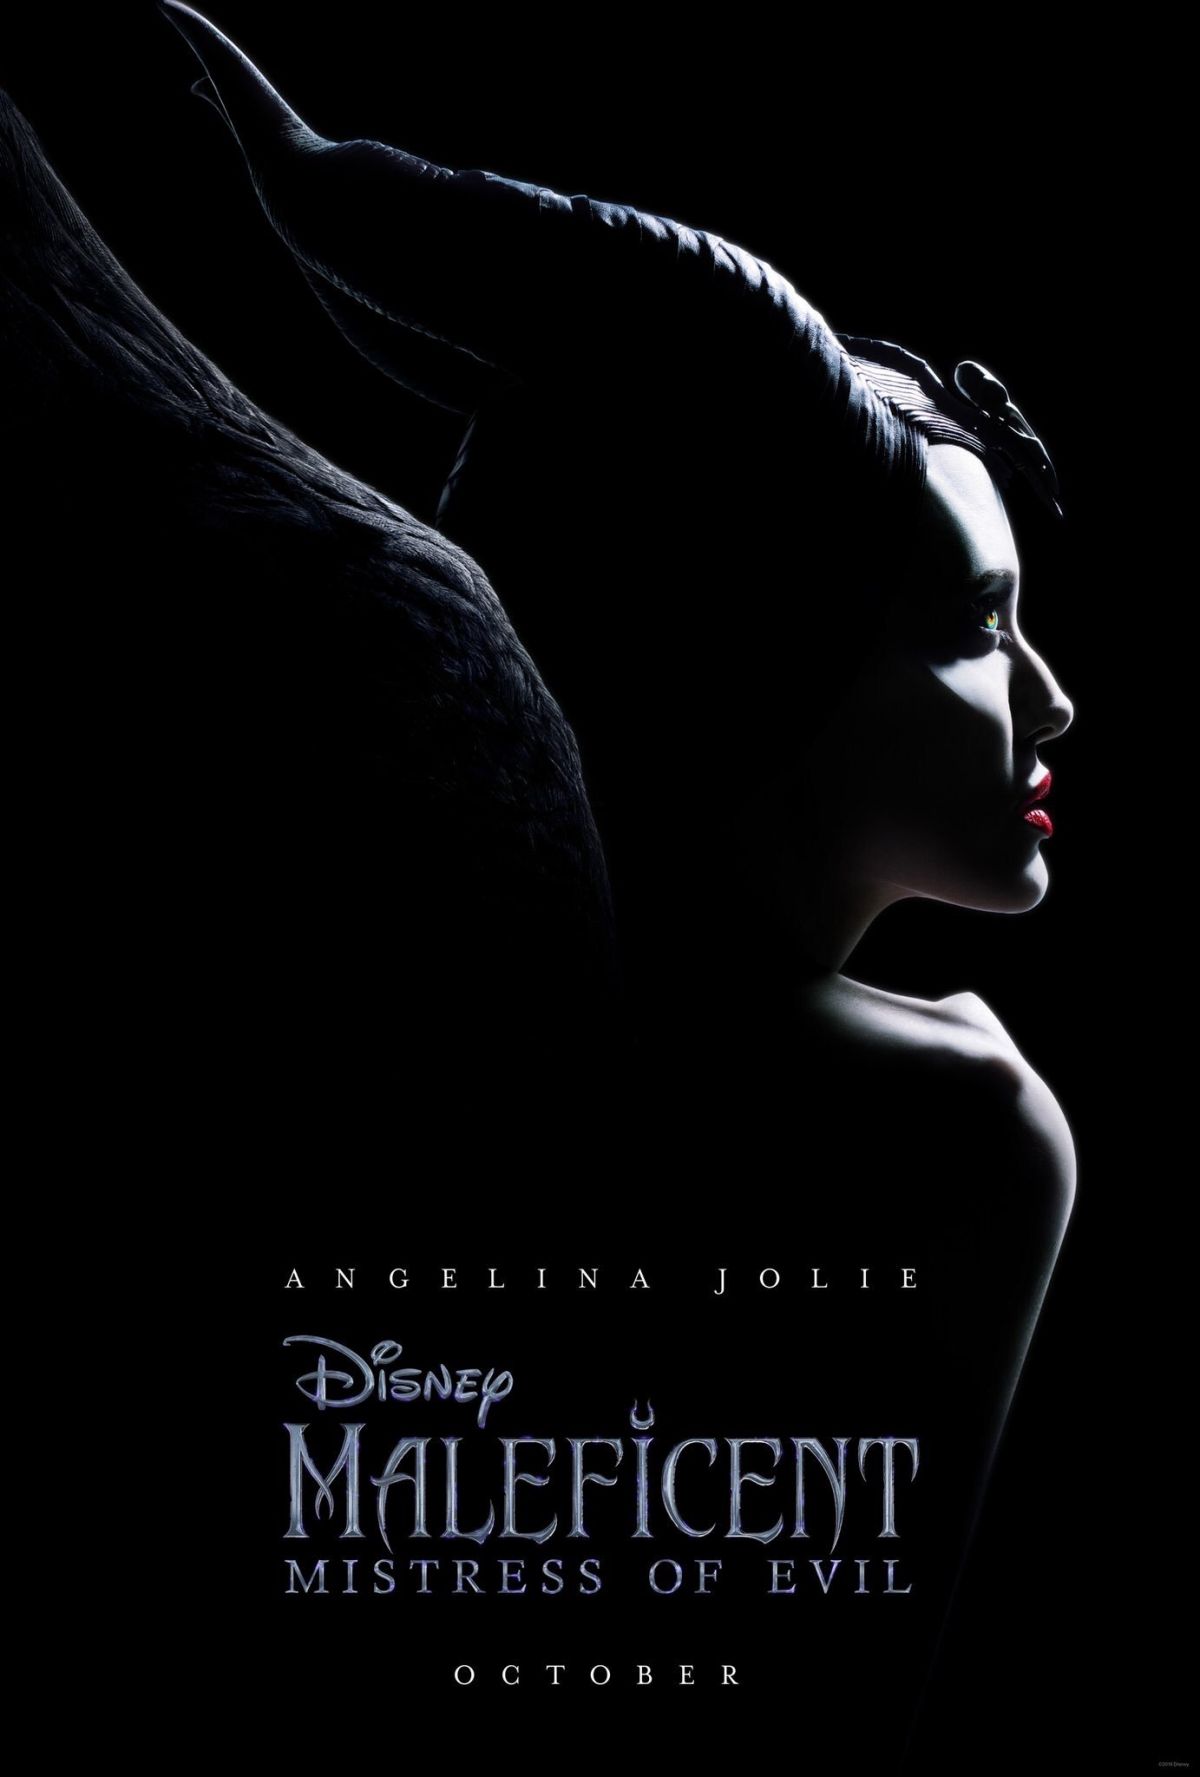 angelina-jolie-maleficent-mistress-of-evil-2019-poster-and-trailer-0.jpg